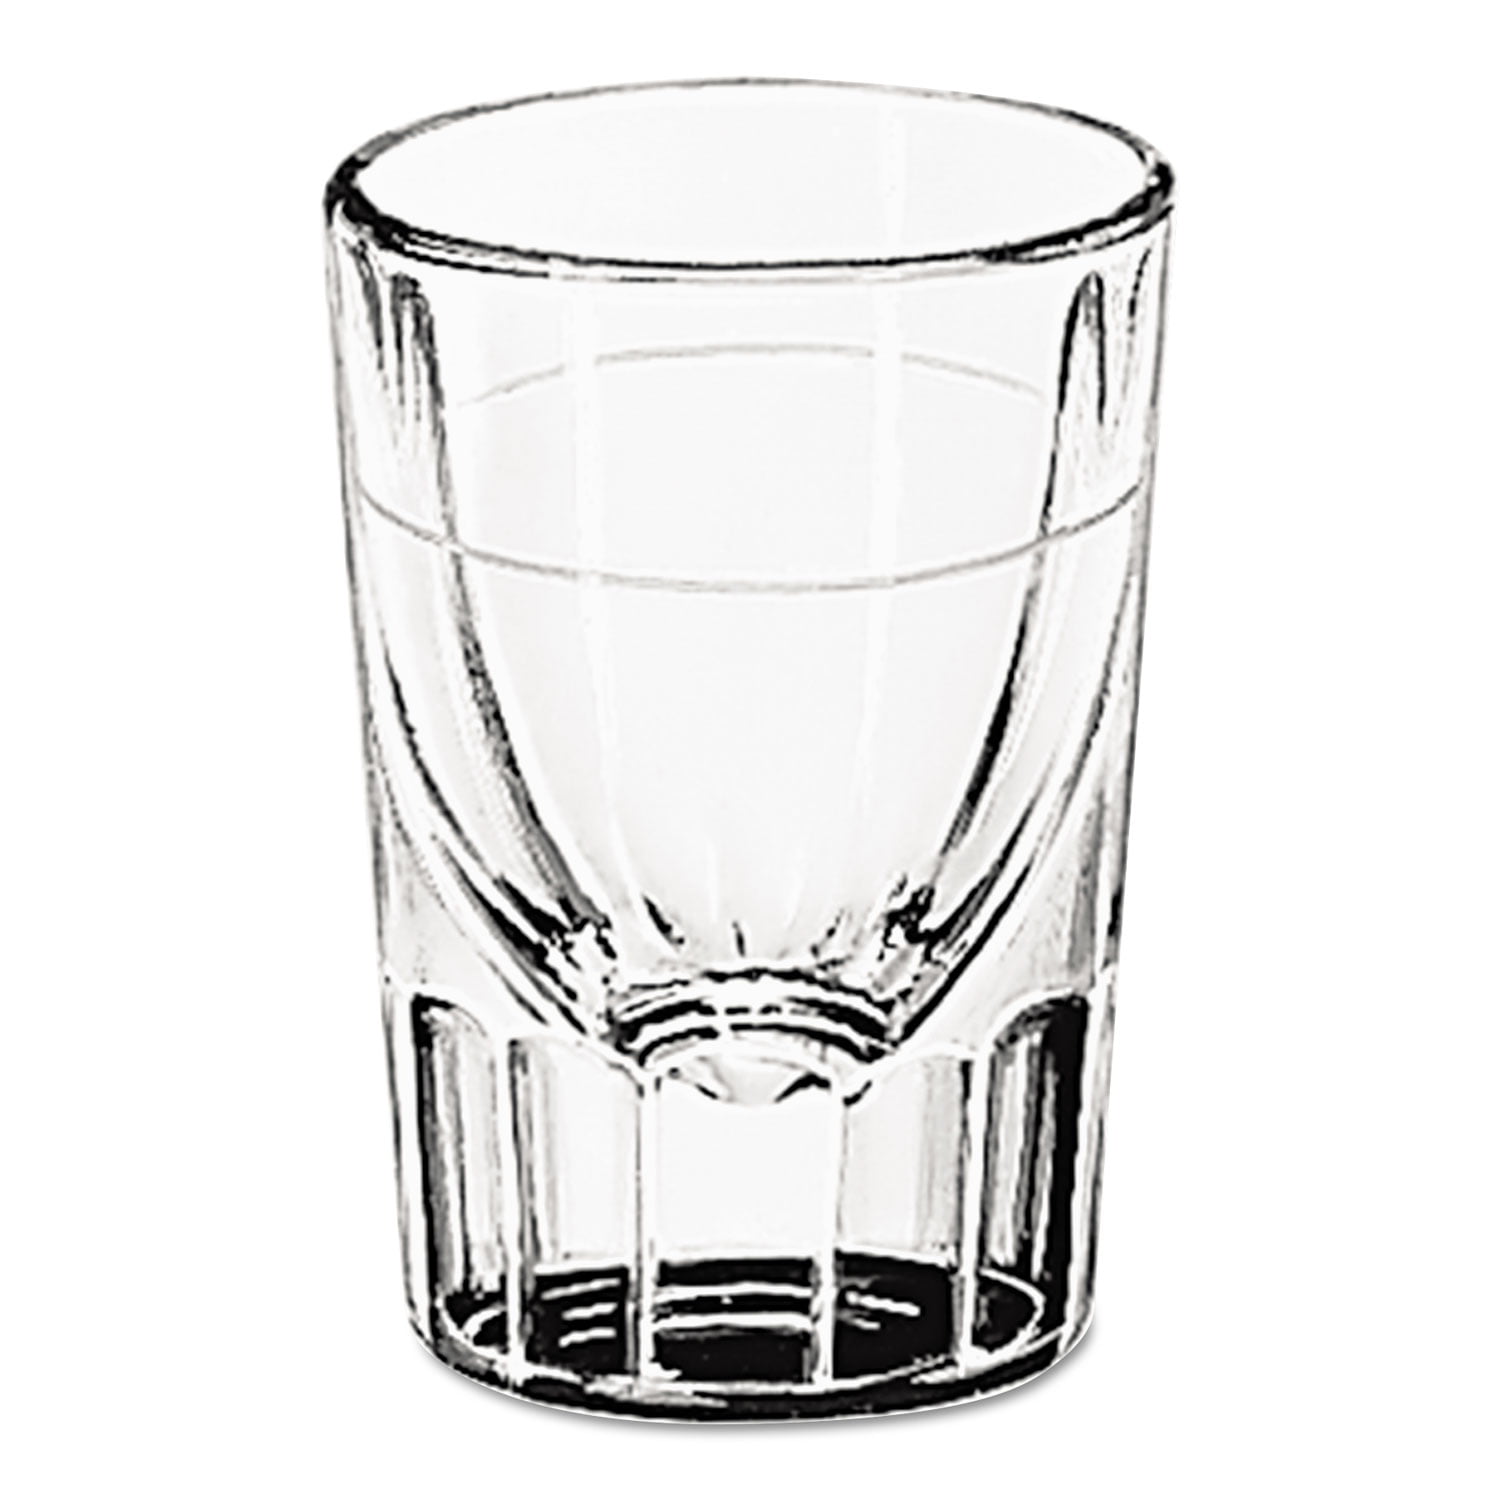 BELMONT STAKES 132 WHISKEY SHOT GLASS 1.5 OZ CLEAR 2000 